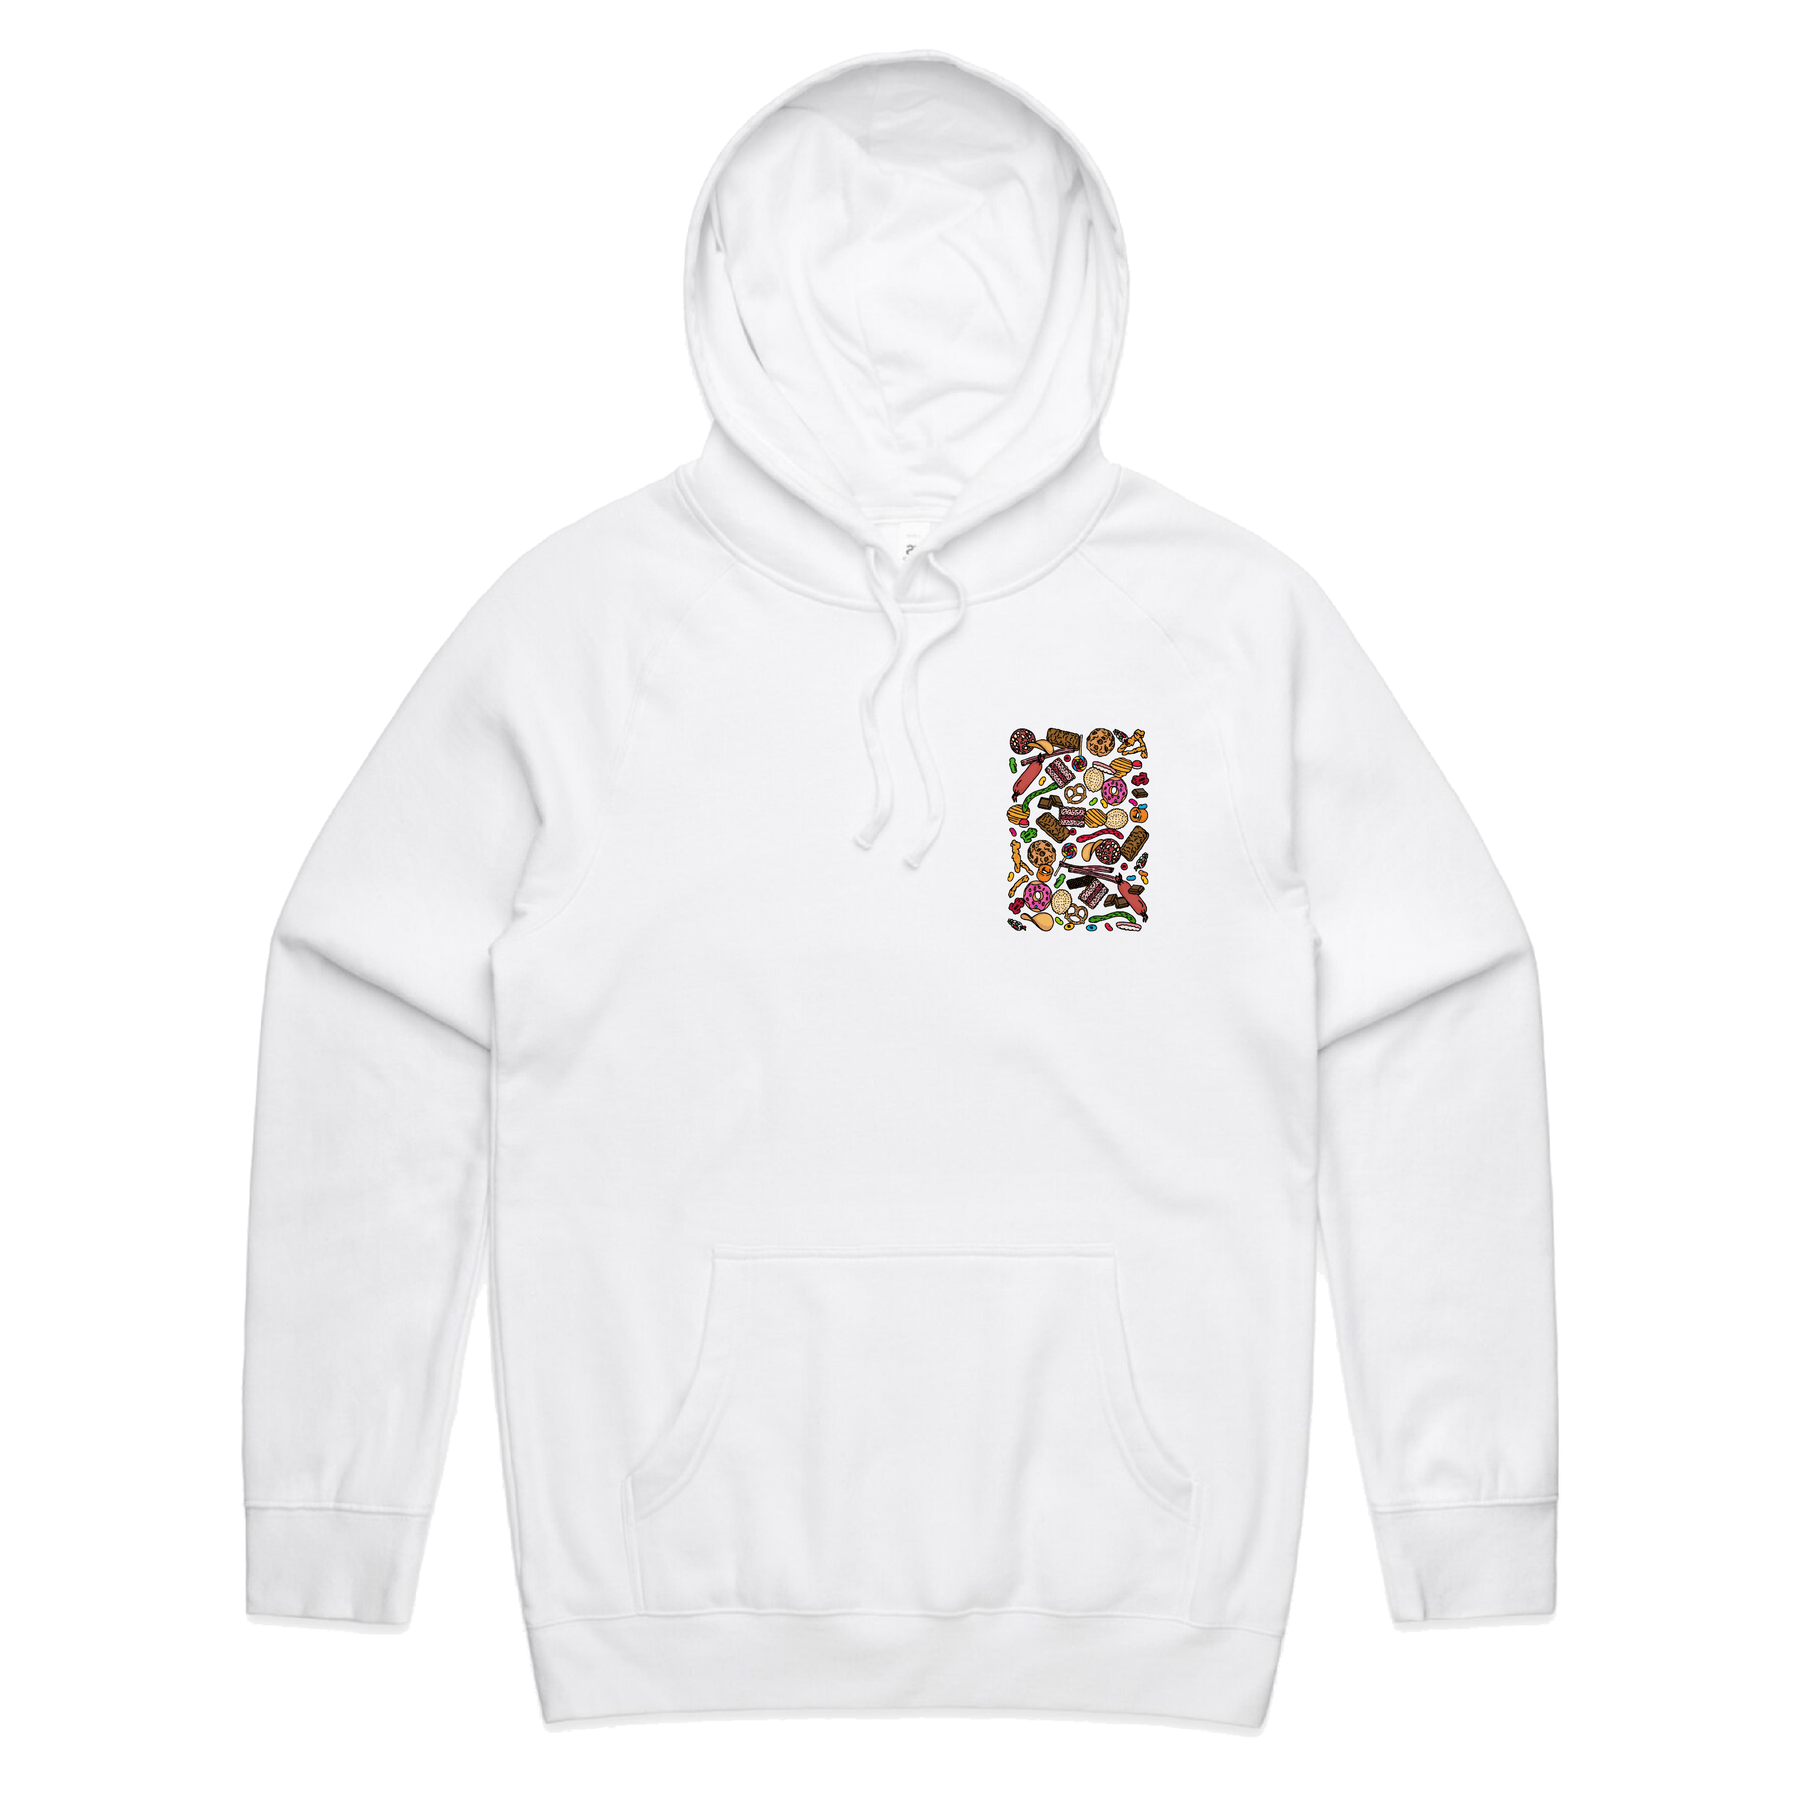 S / White / Small Front Print Snacks! 🍬🍪 - Unisex Hoodie